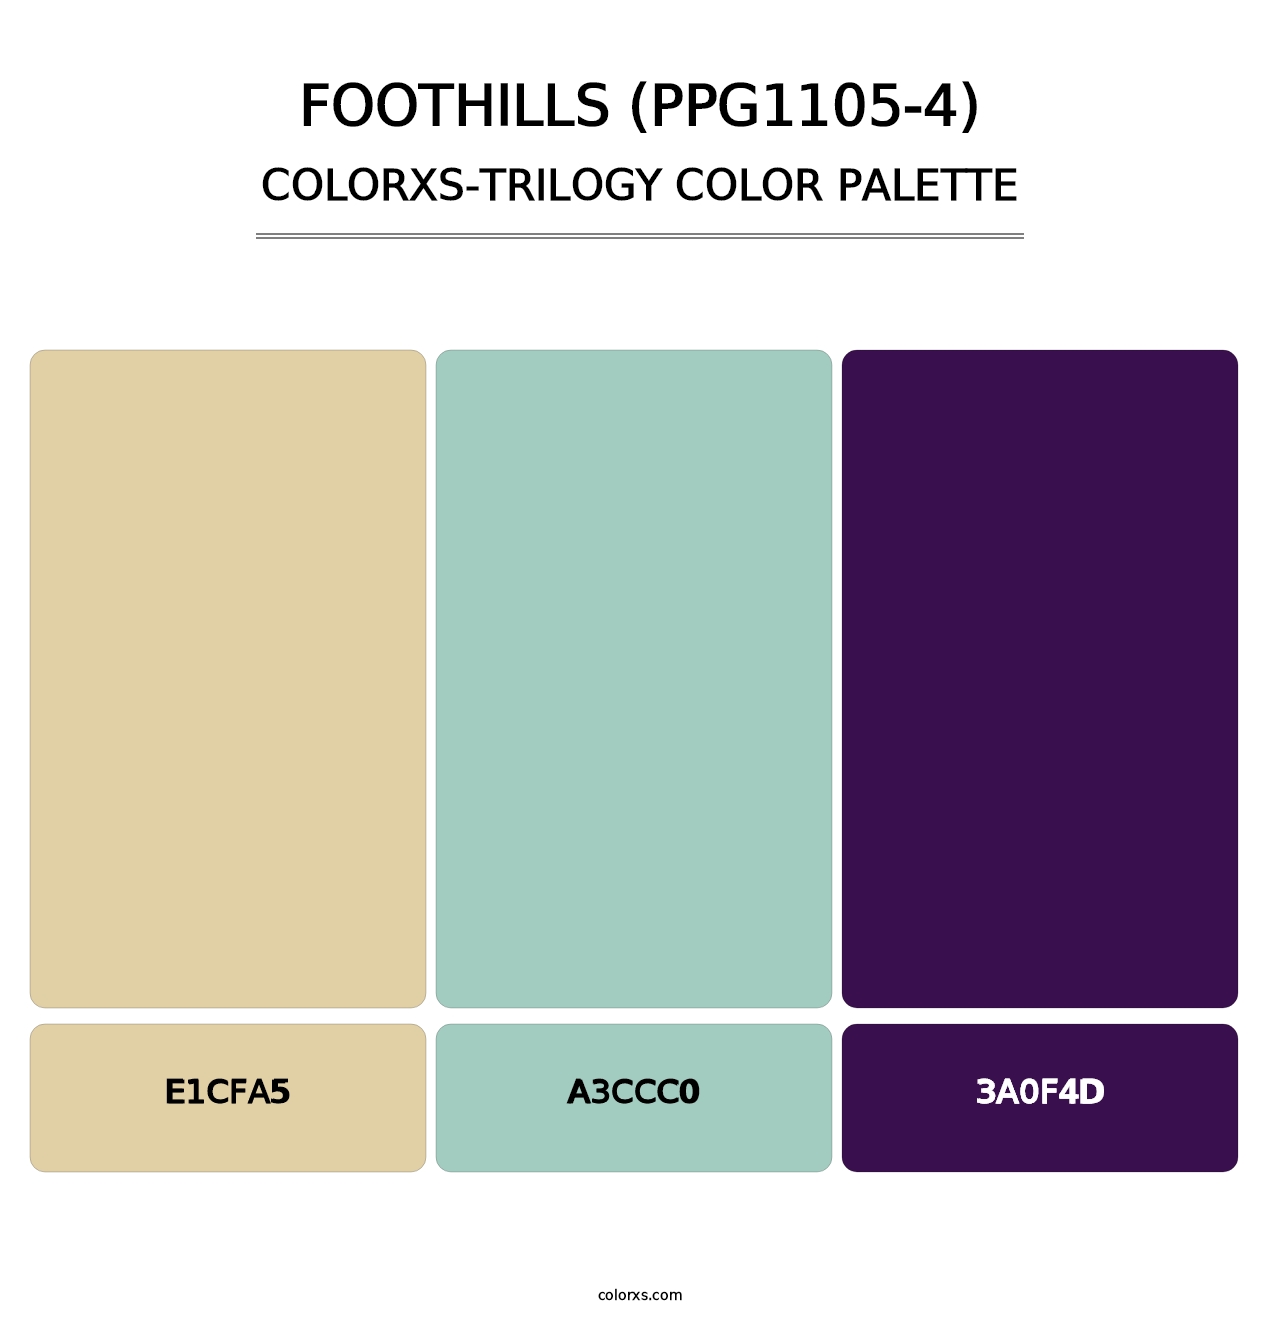 Foothills (PPG1105-4) - Colorxs Trilogy Palette